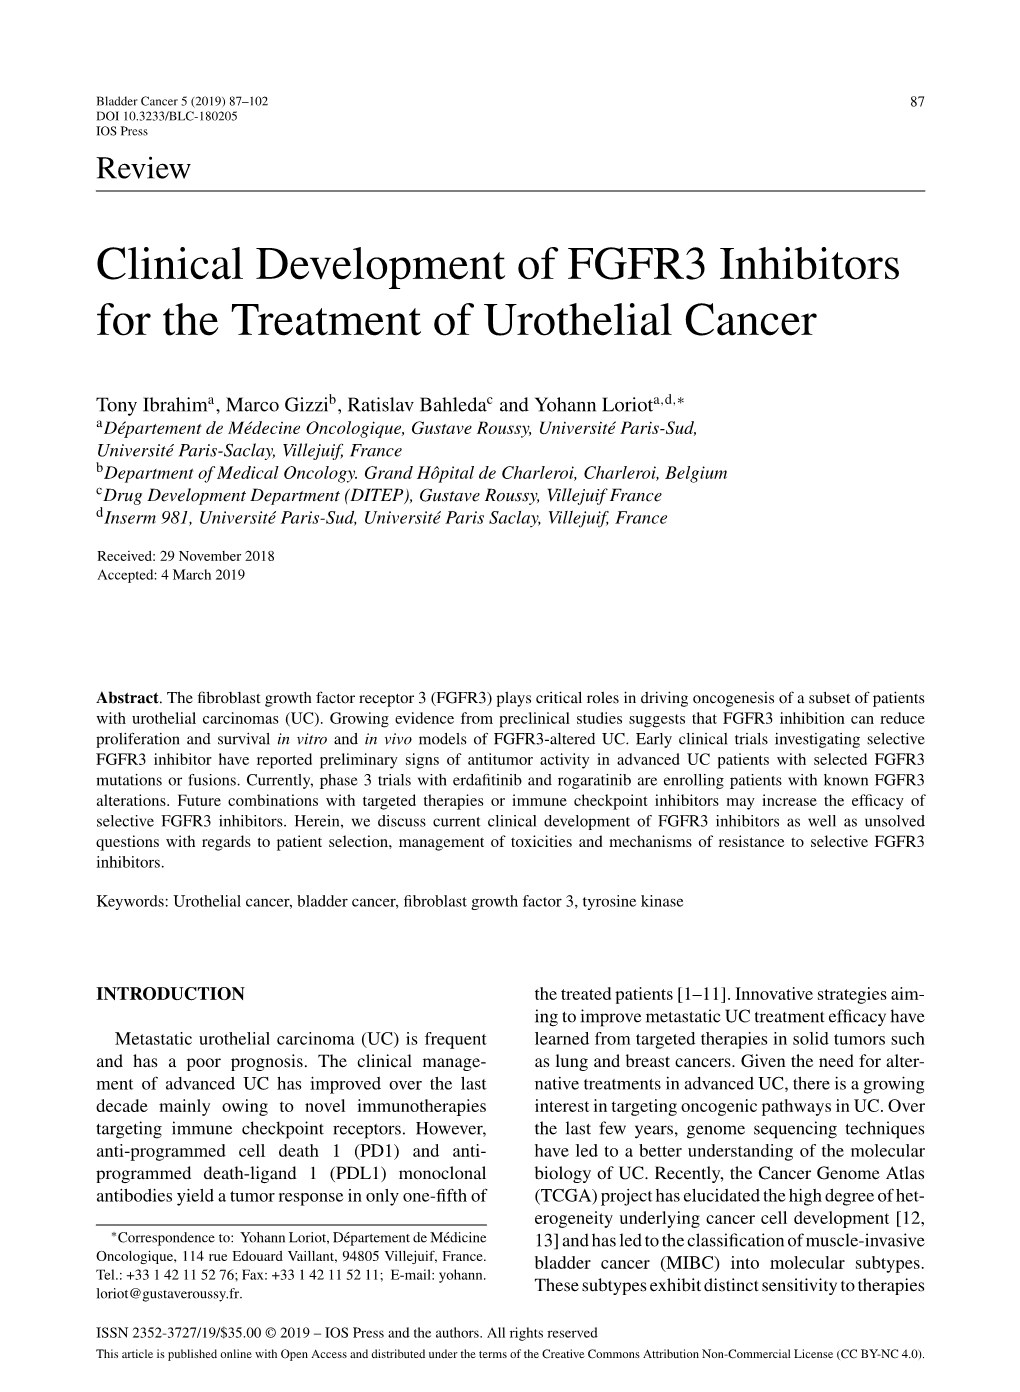 Clinical Development of FGFR3 Inhibitors for the Treatment of Urothelial Cancer